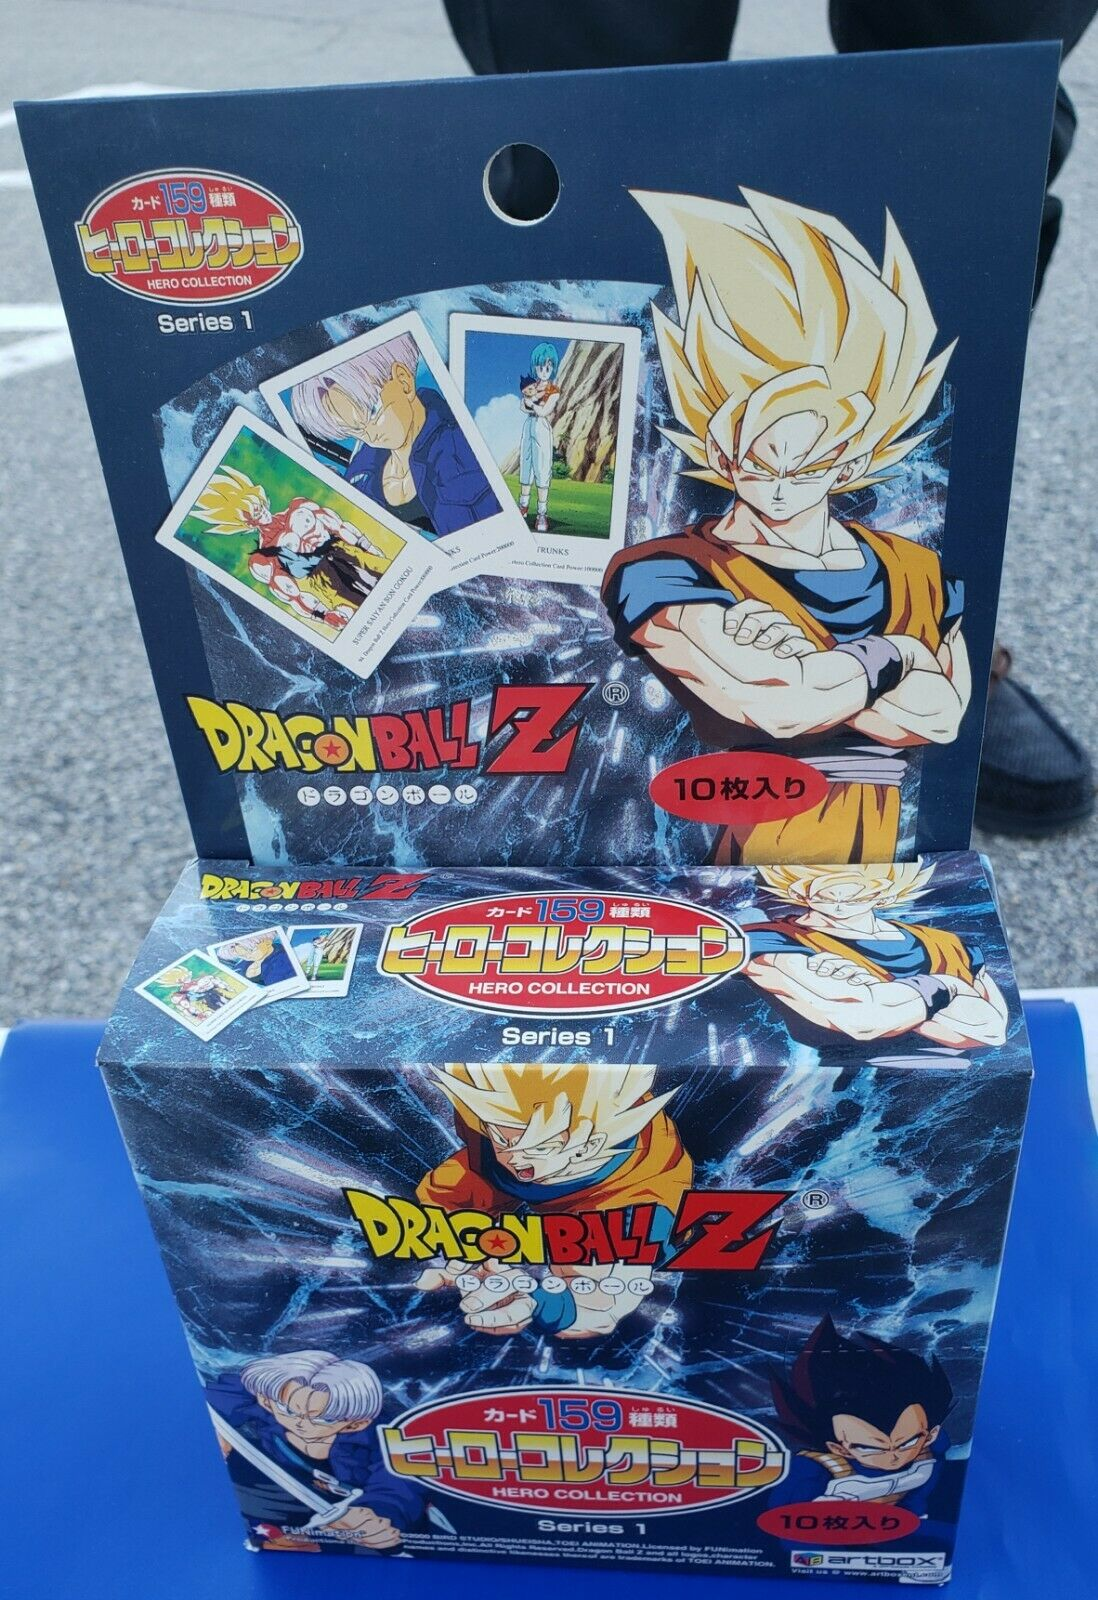 Artbox Dragonball Z Japanese Hero Collection Series 1 Trading Cards Box